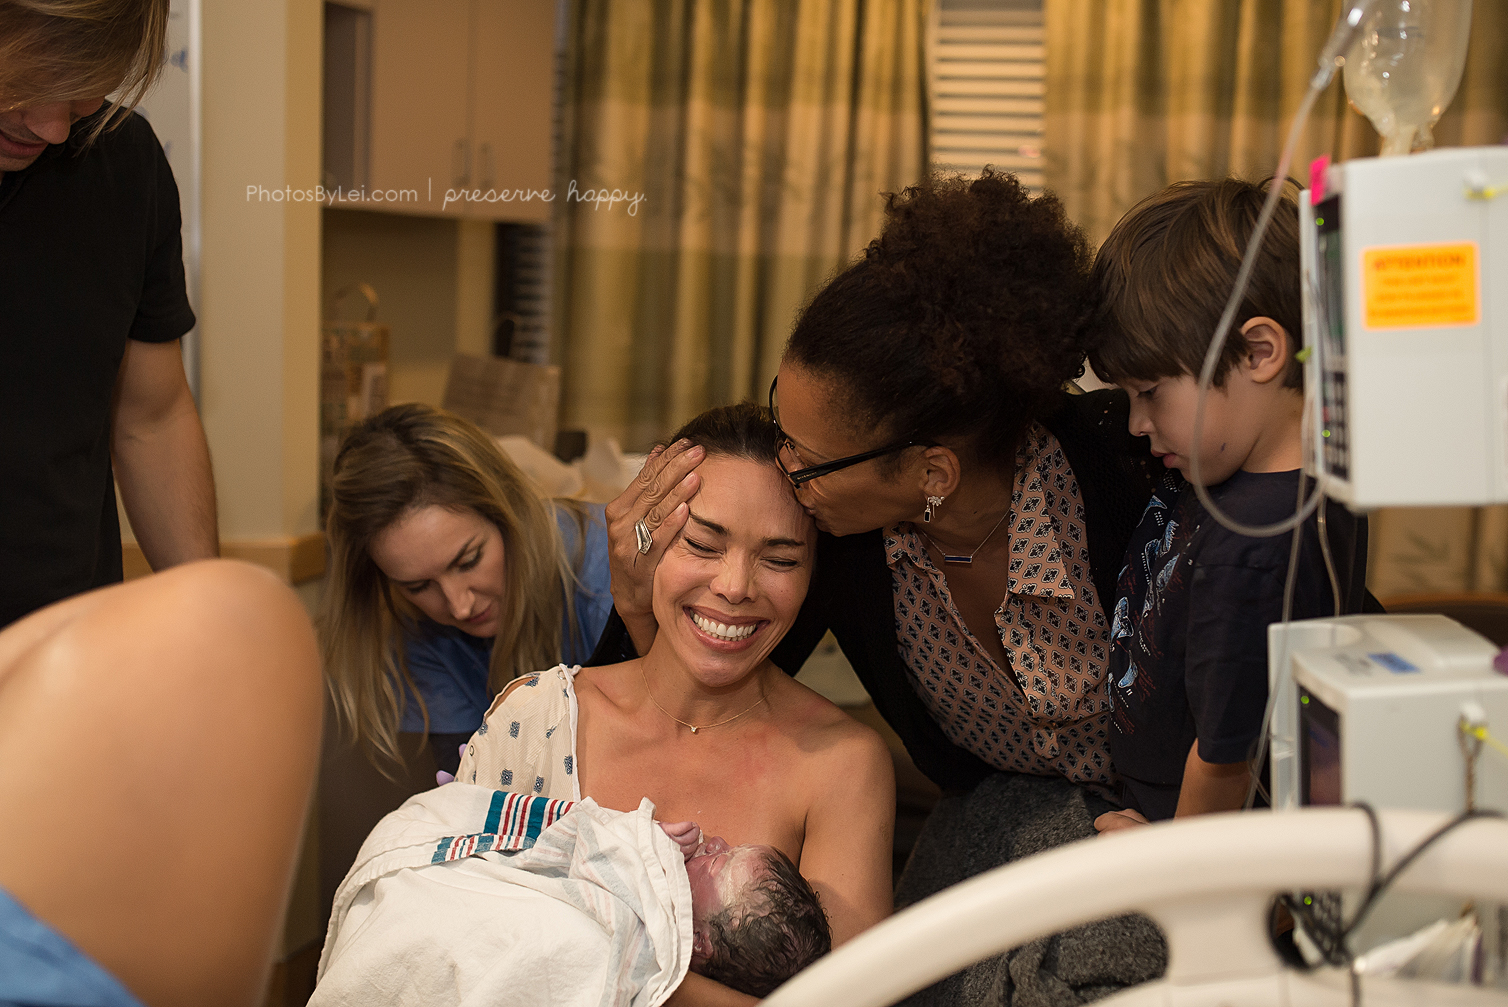 PHOTO: Kim Overton's joy at seeing the birth of her son Oliver via surrogate is captured here.